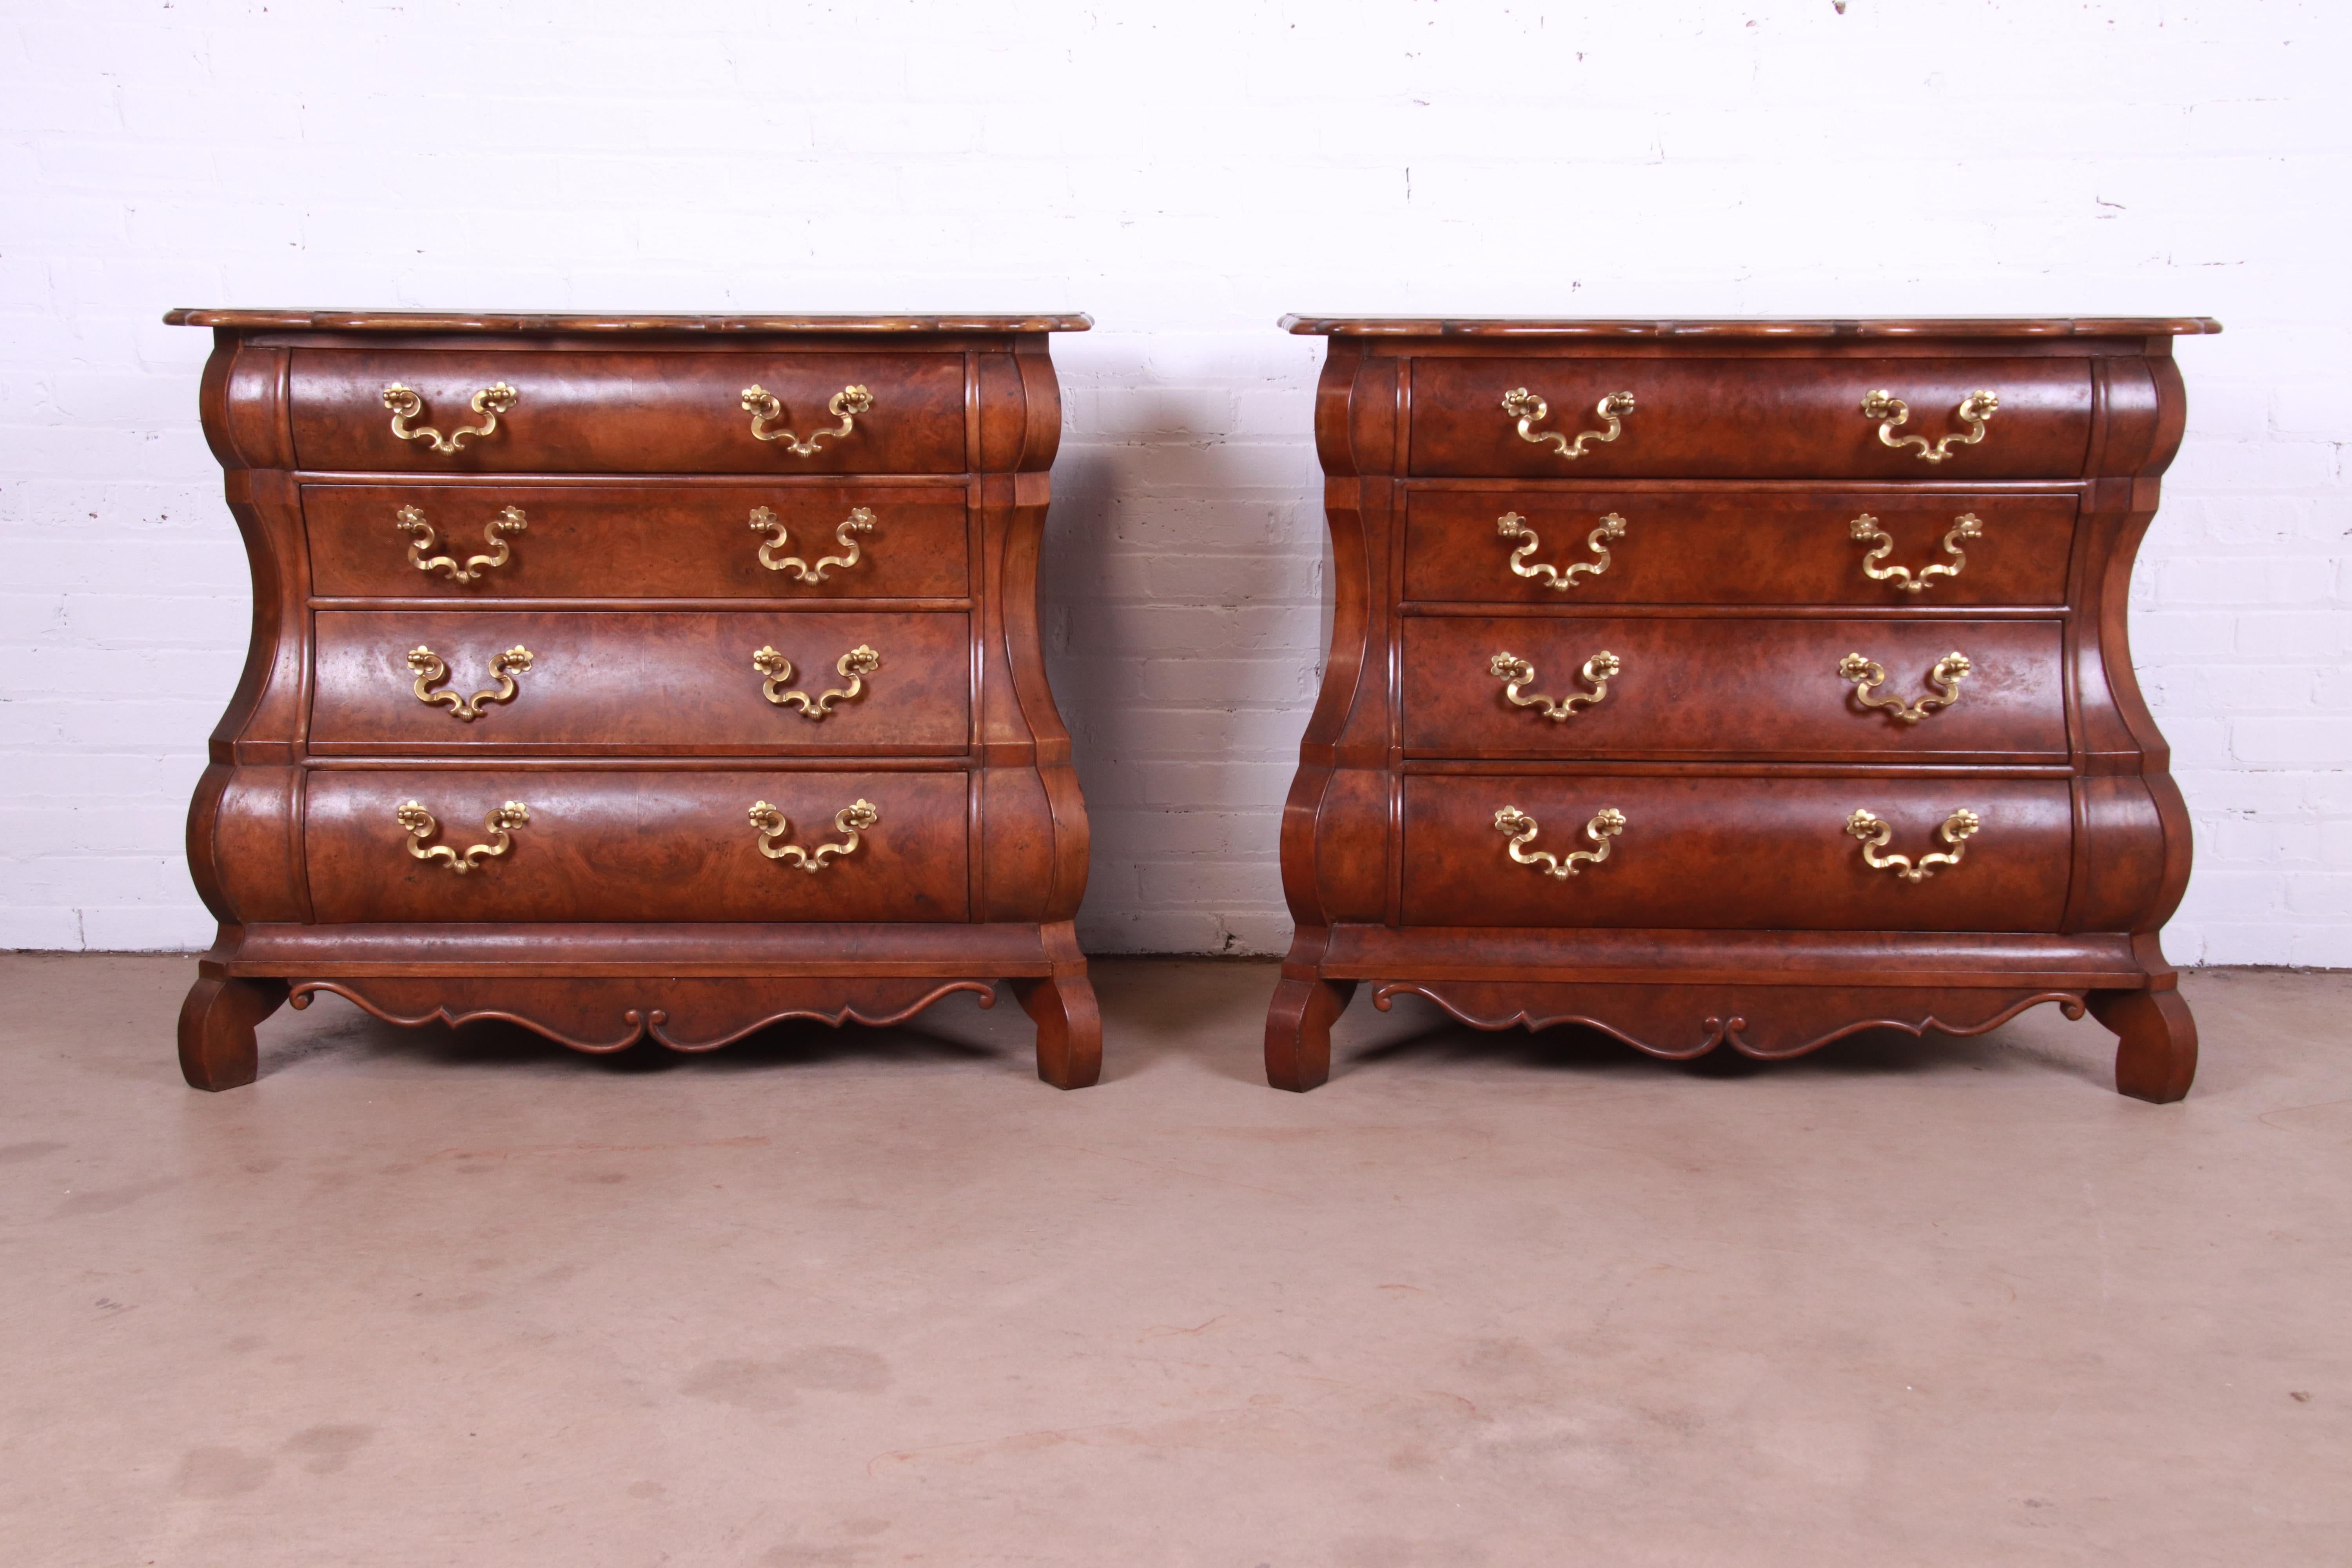 Louis XV Baker Furniture Dutch Burled Walnut Bombe Chests or Commodes, Pair